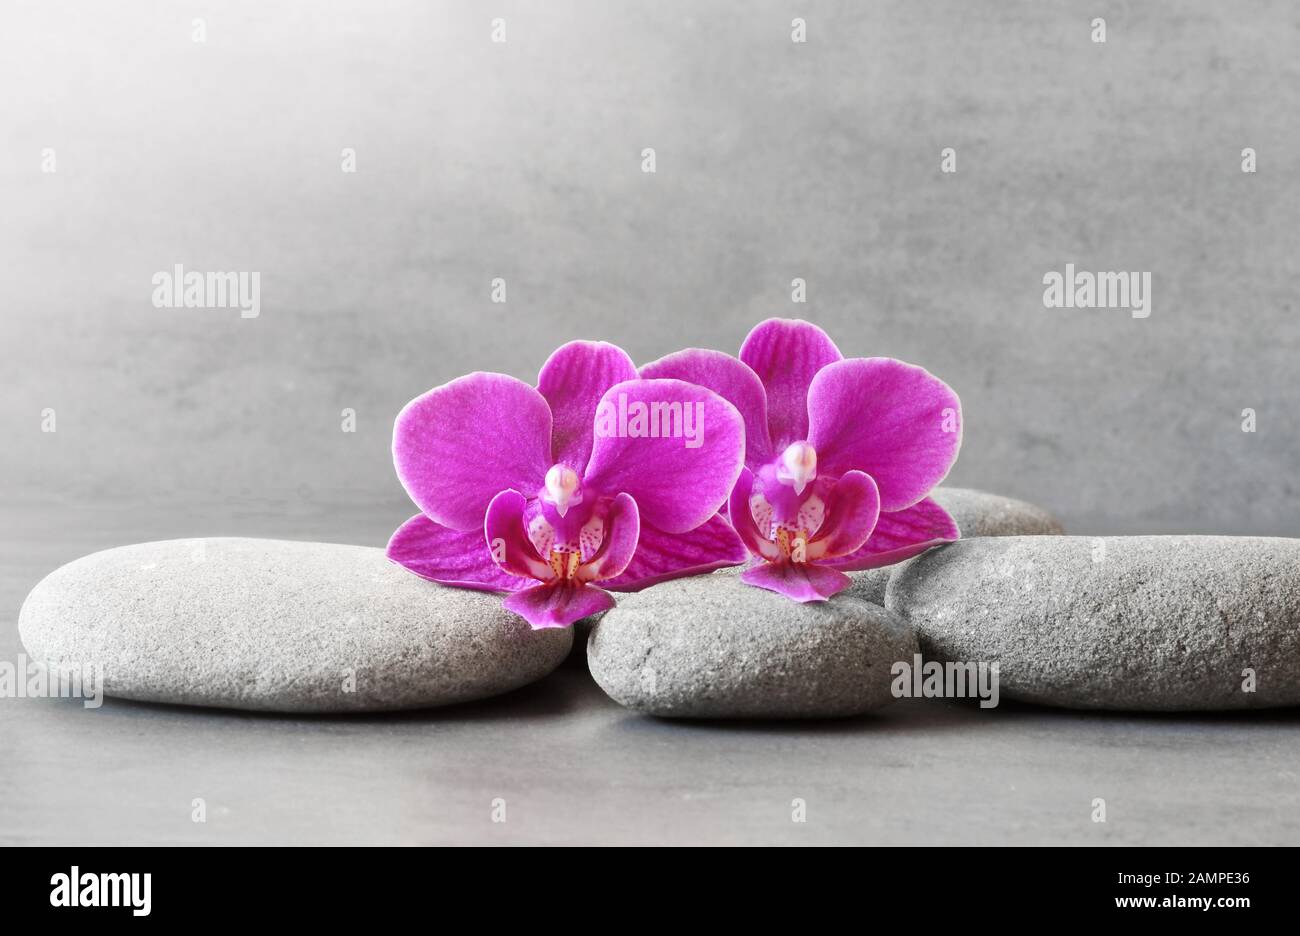 Spa stones and orchid flower on the grey background. Stock Photo